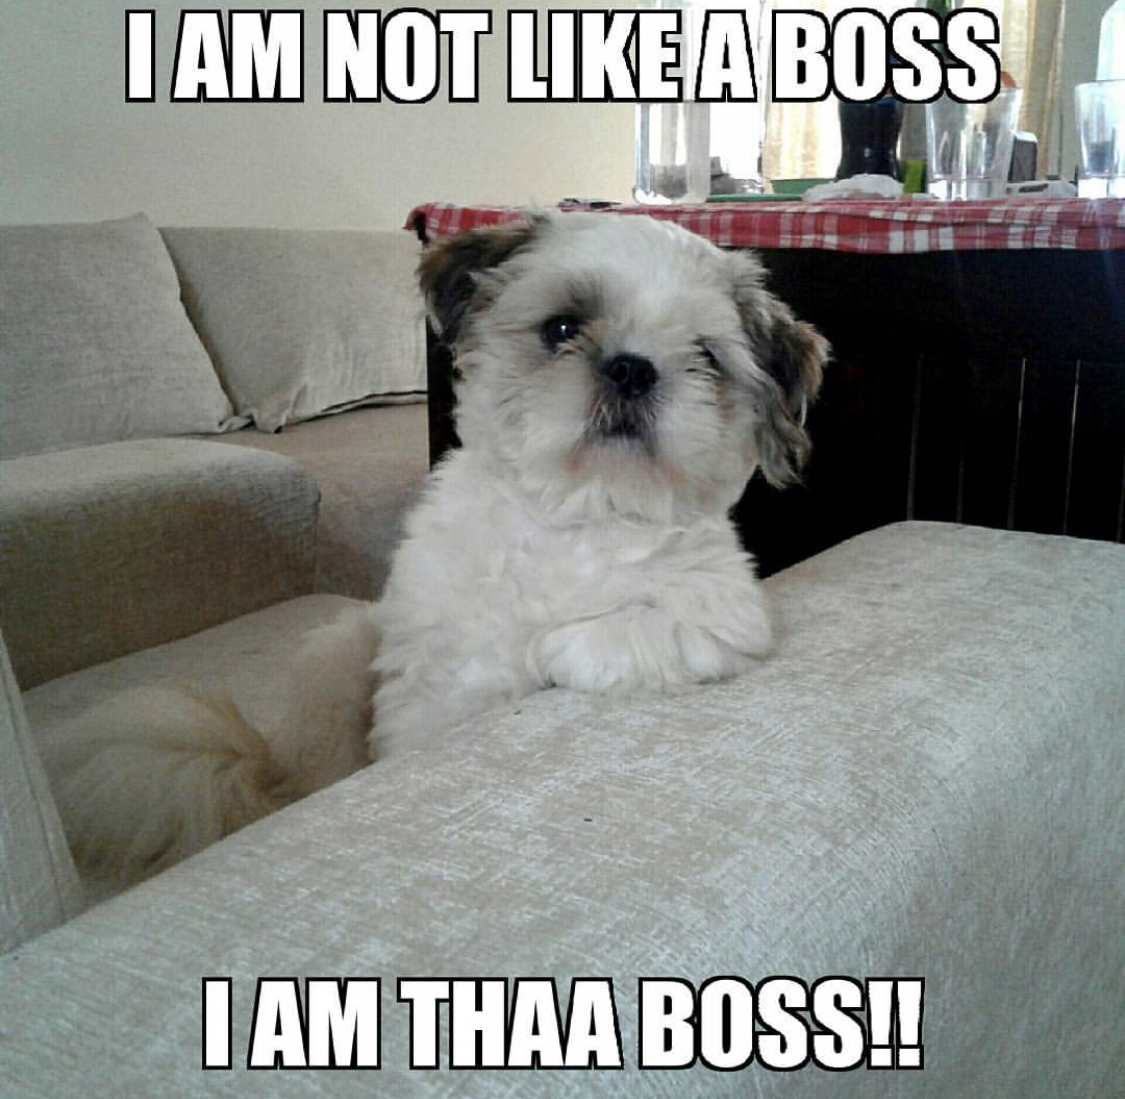 Shih Tzu sitting on the couch photo with a text 